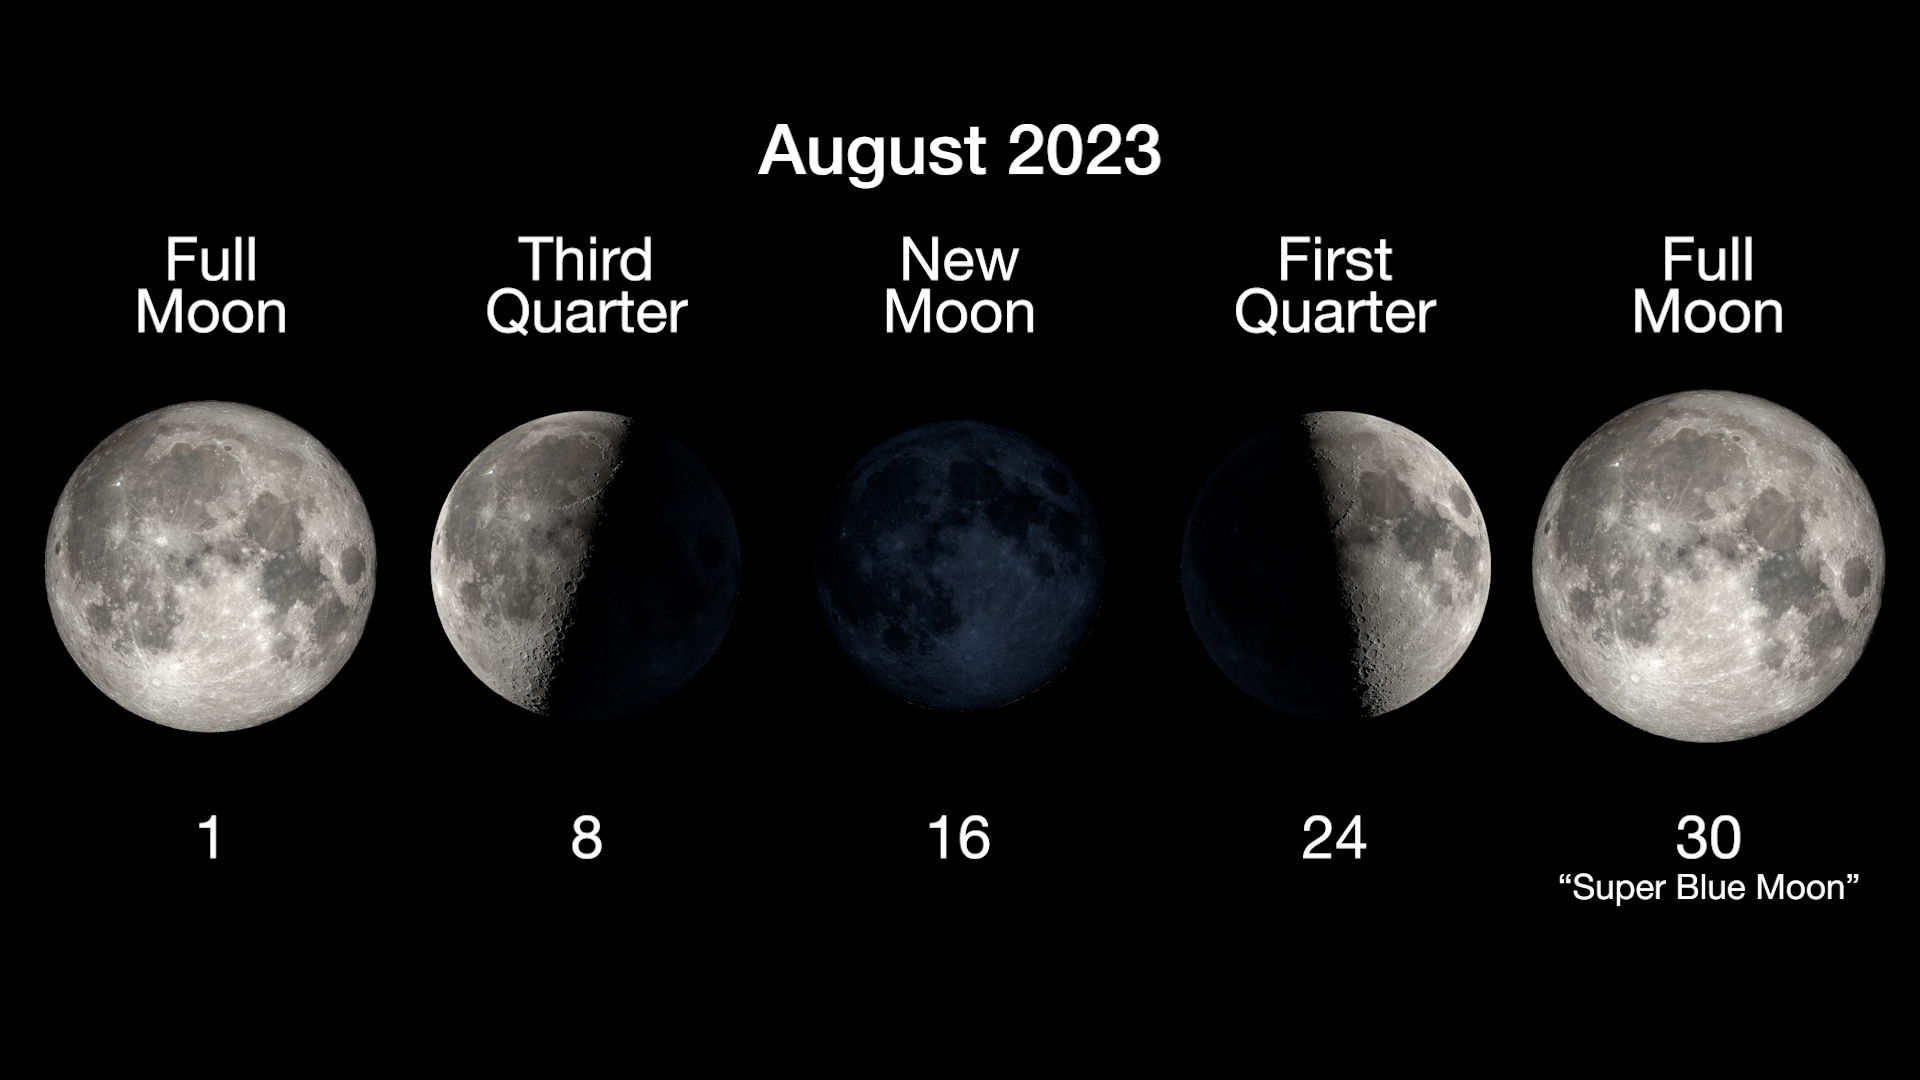 phases of the moon for august 2023. from the left to right is a full moon on aug 1, third quarter moon on aug 8, new moon on aug 16, first quarter on aug 24, and blue supermoon on aug 30